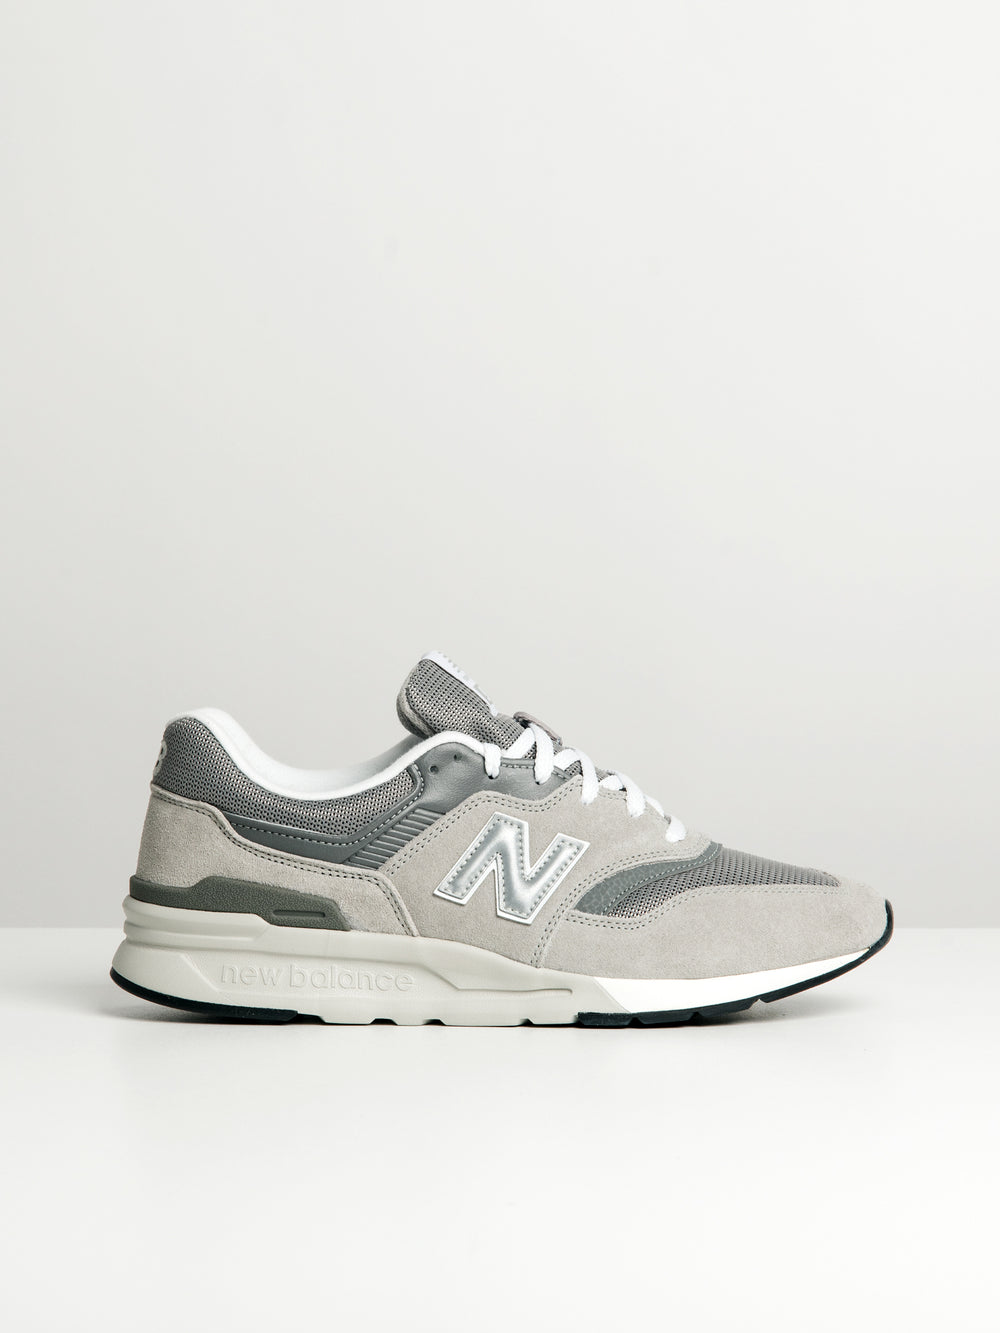  SNEAKER THE 997 POUR HOMME